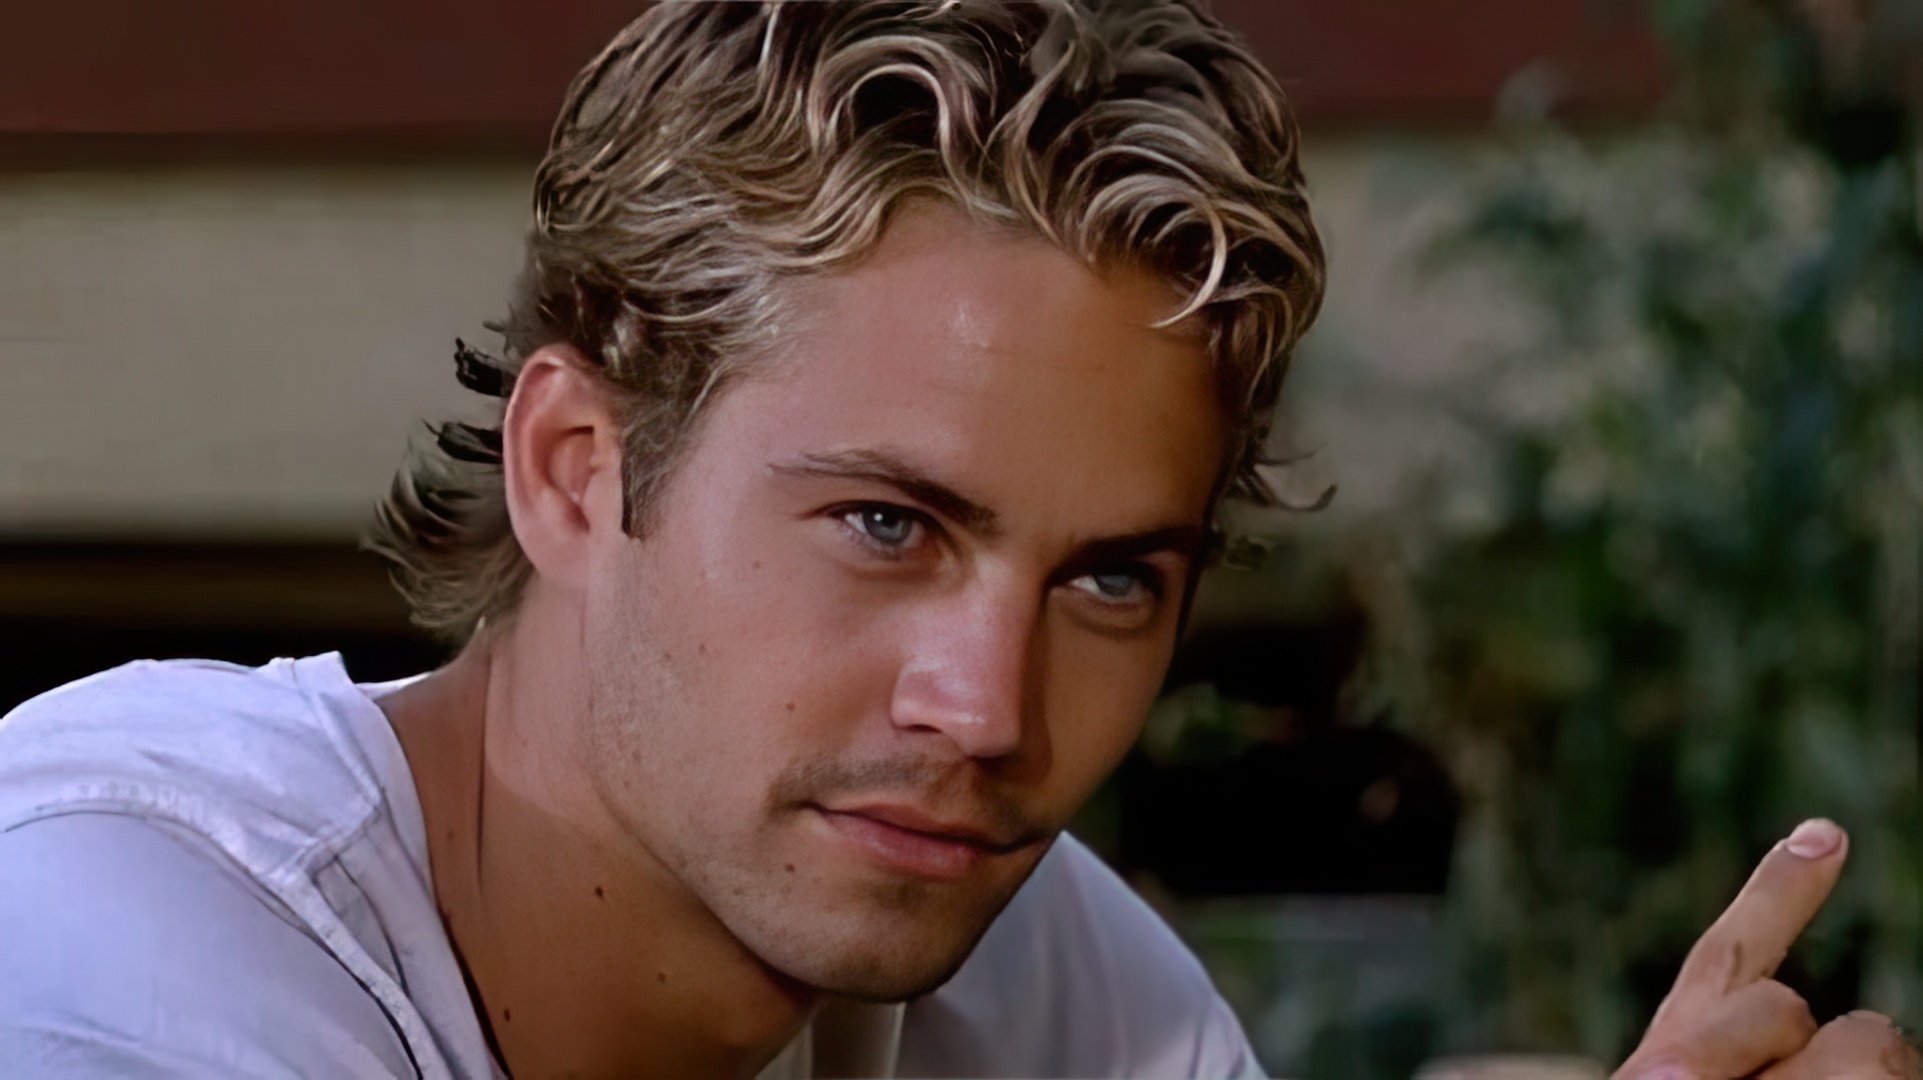 Paul Walker was renowned for his charm with the ladies